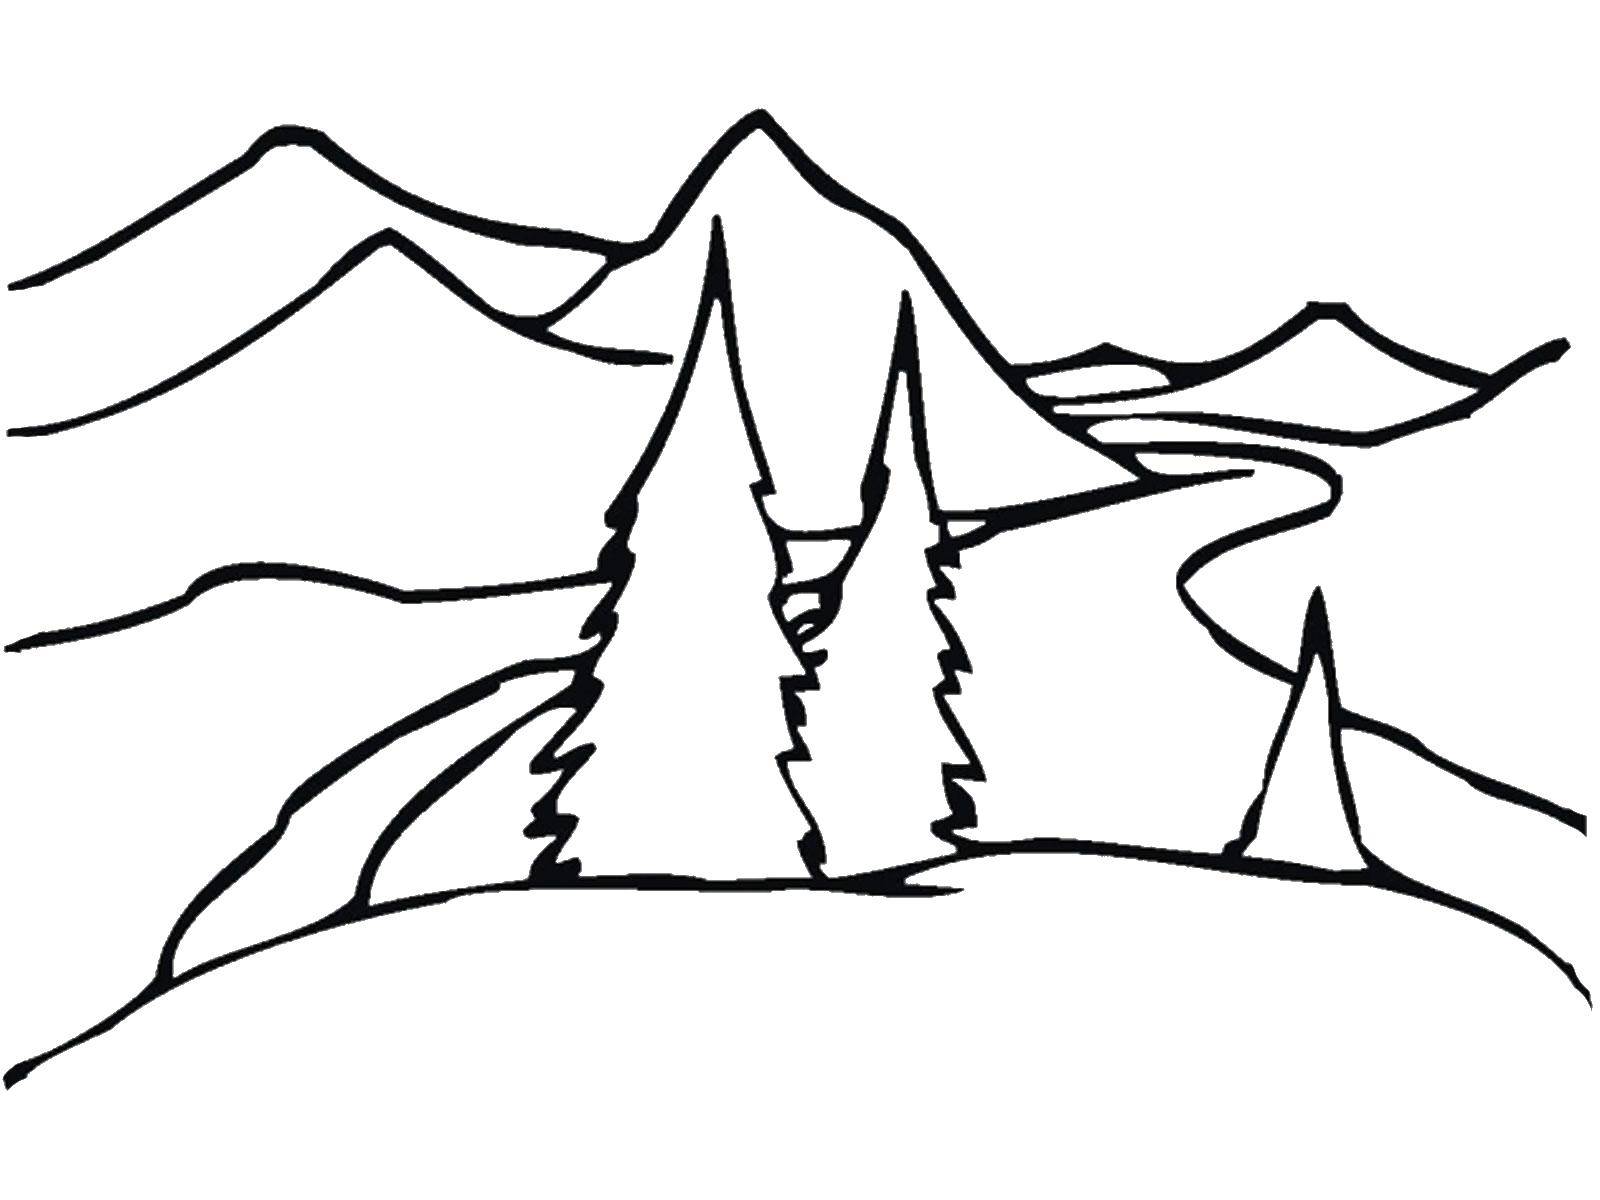 Coloring The mountains and forest. Category Nature. Tags:  mountain, forest.